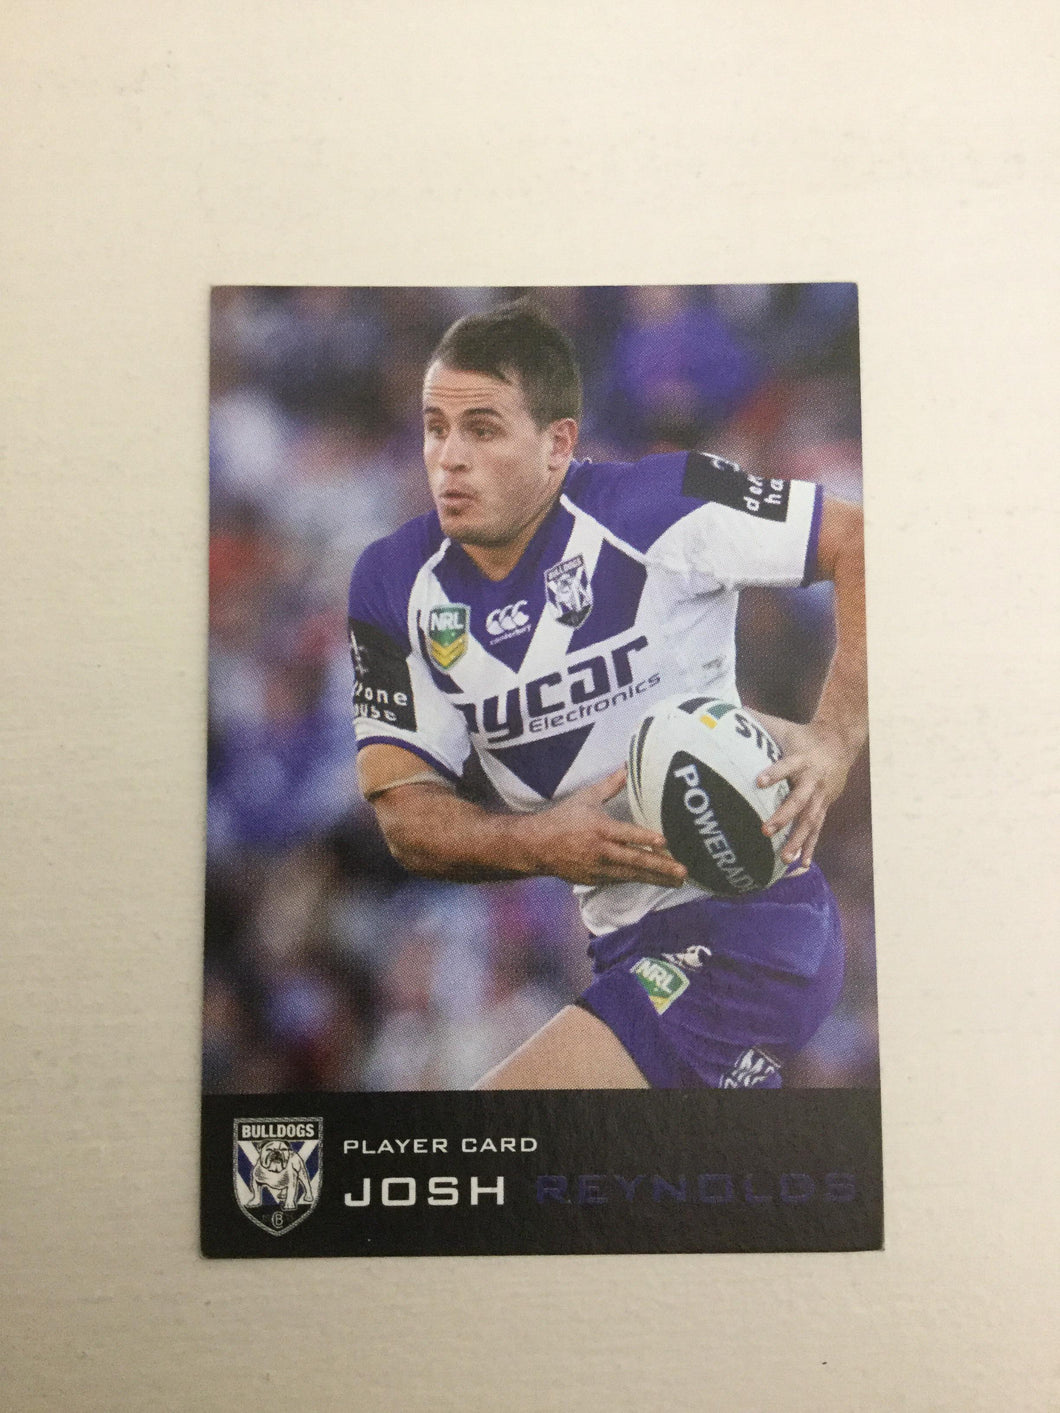 2014 Oliver Brown Josh Reynolds Bulldogs Rugby League card